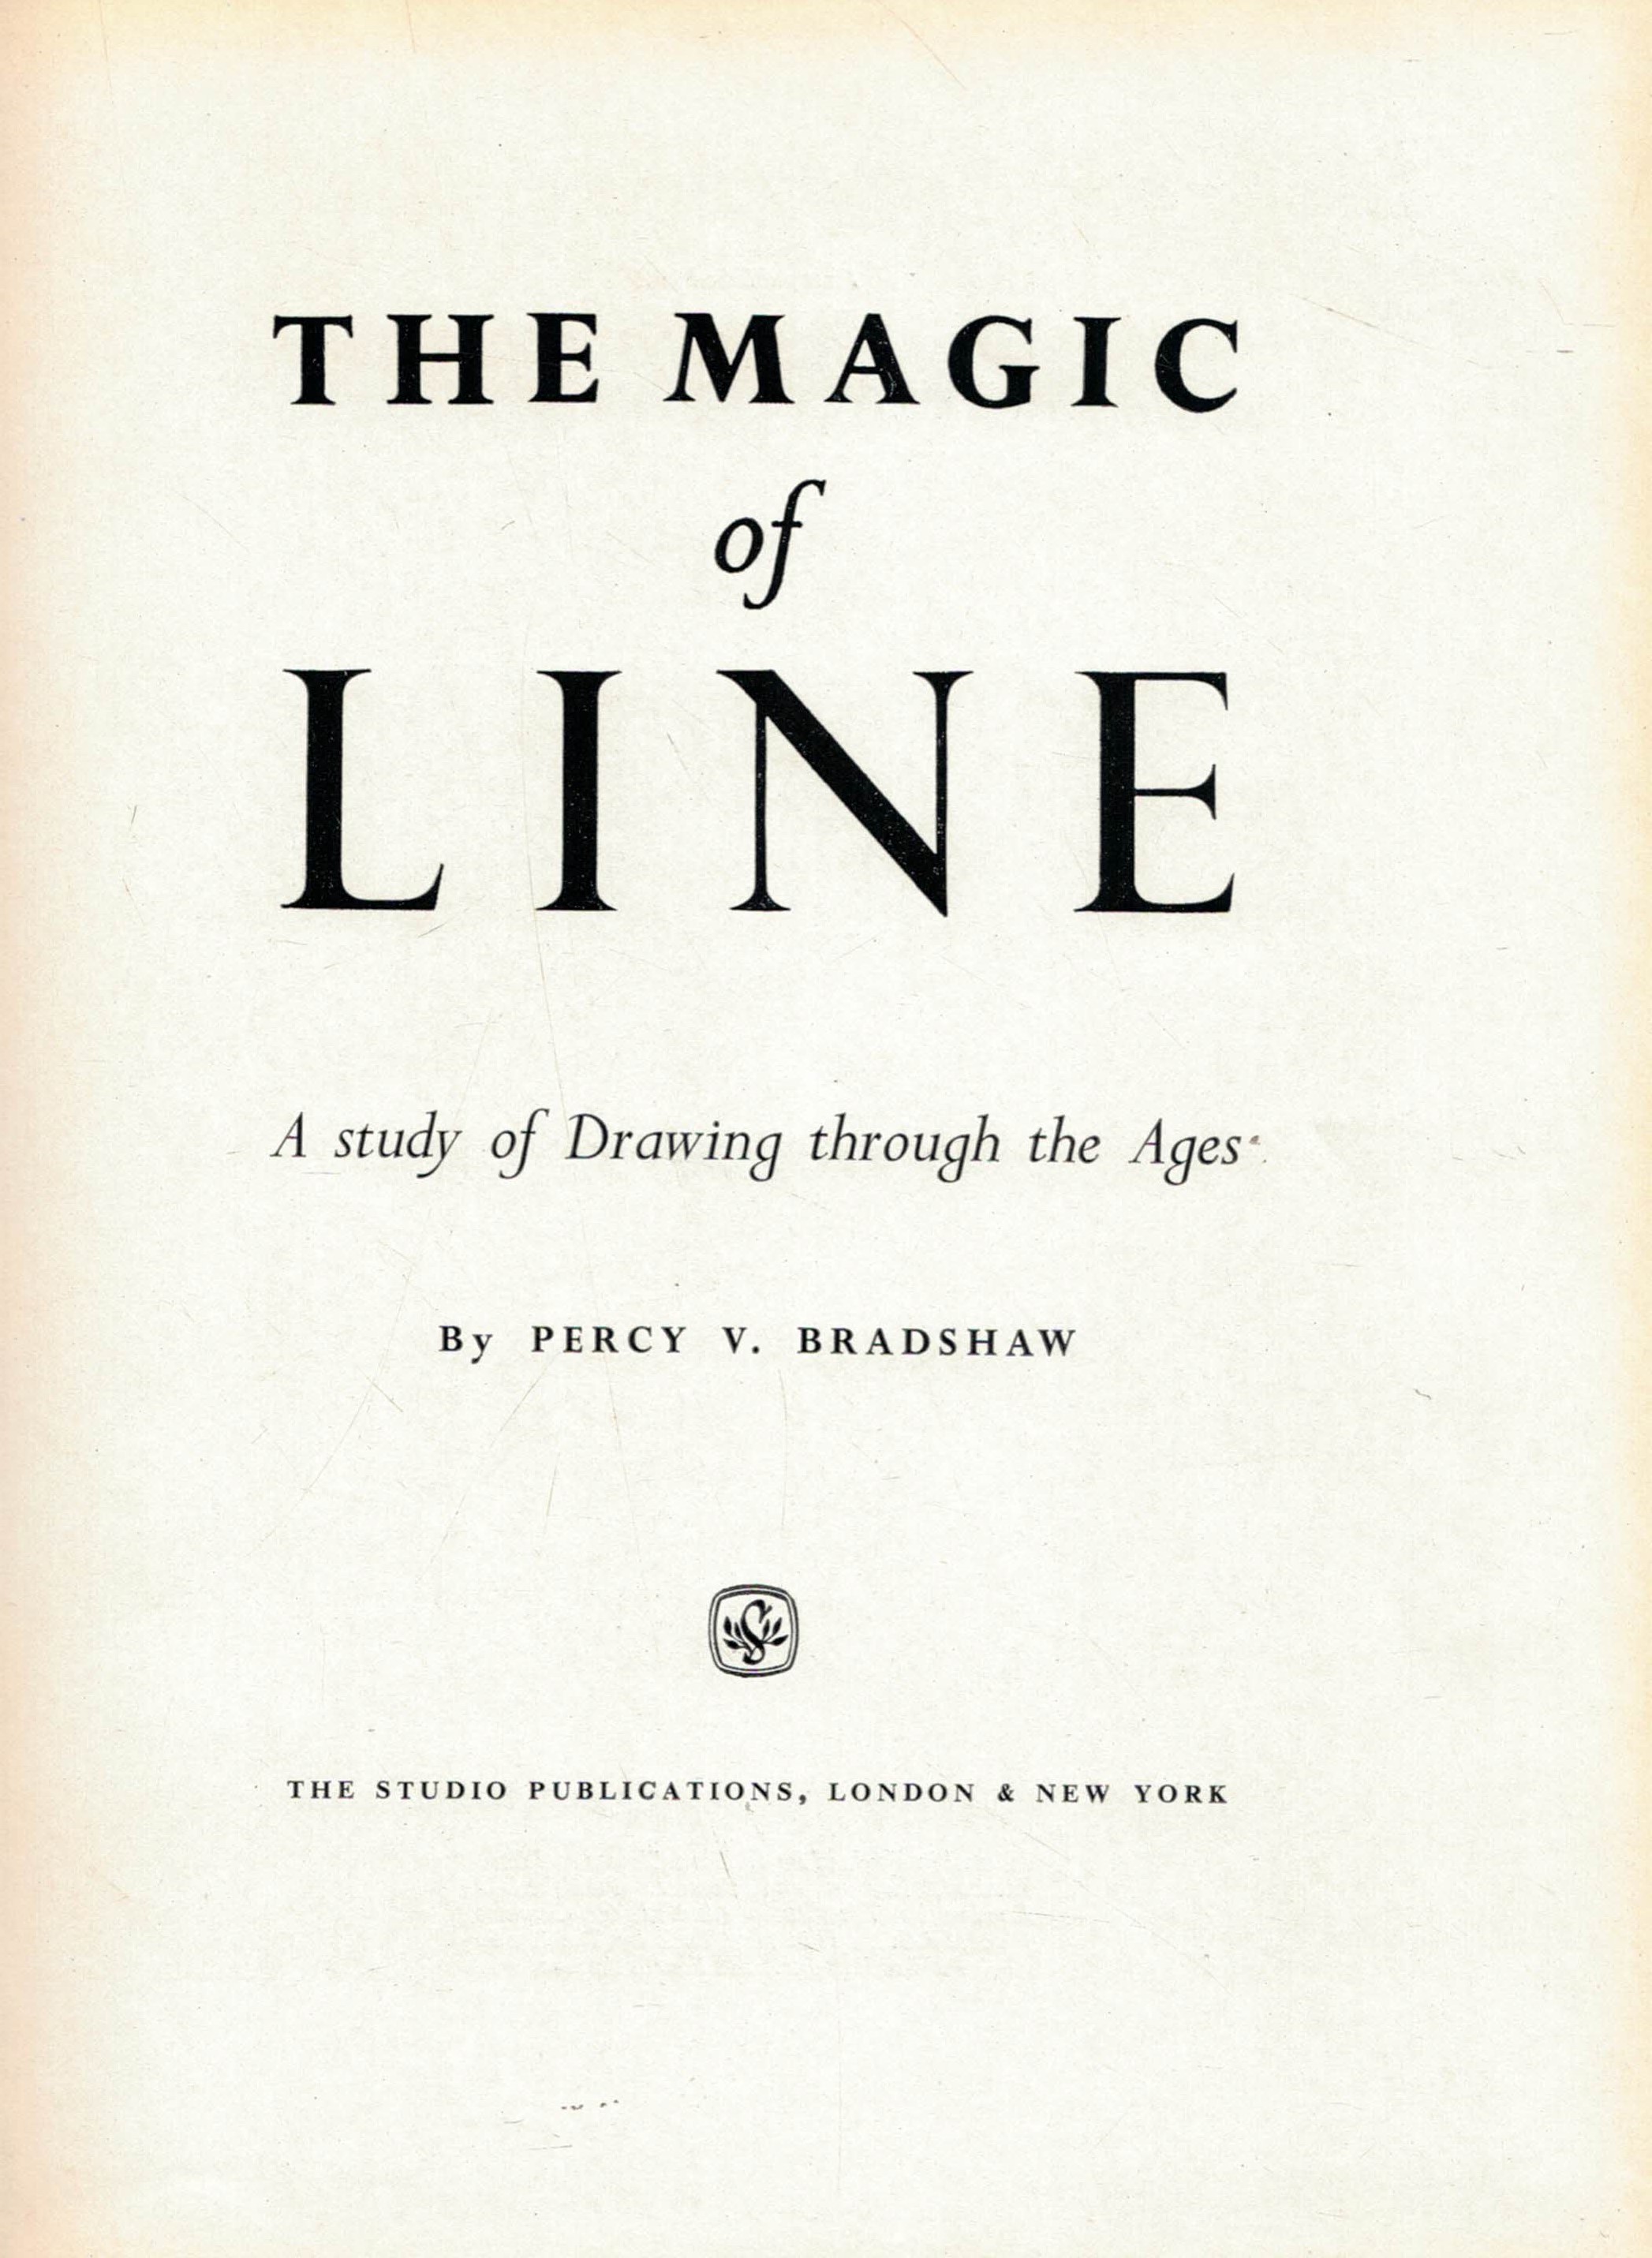 The Magic of Line. A Study of Drawing through the Ages. Signed copy.